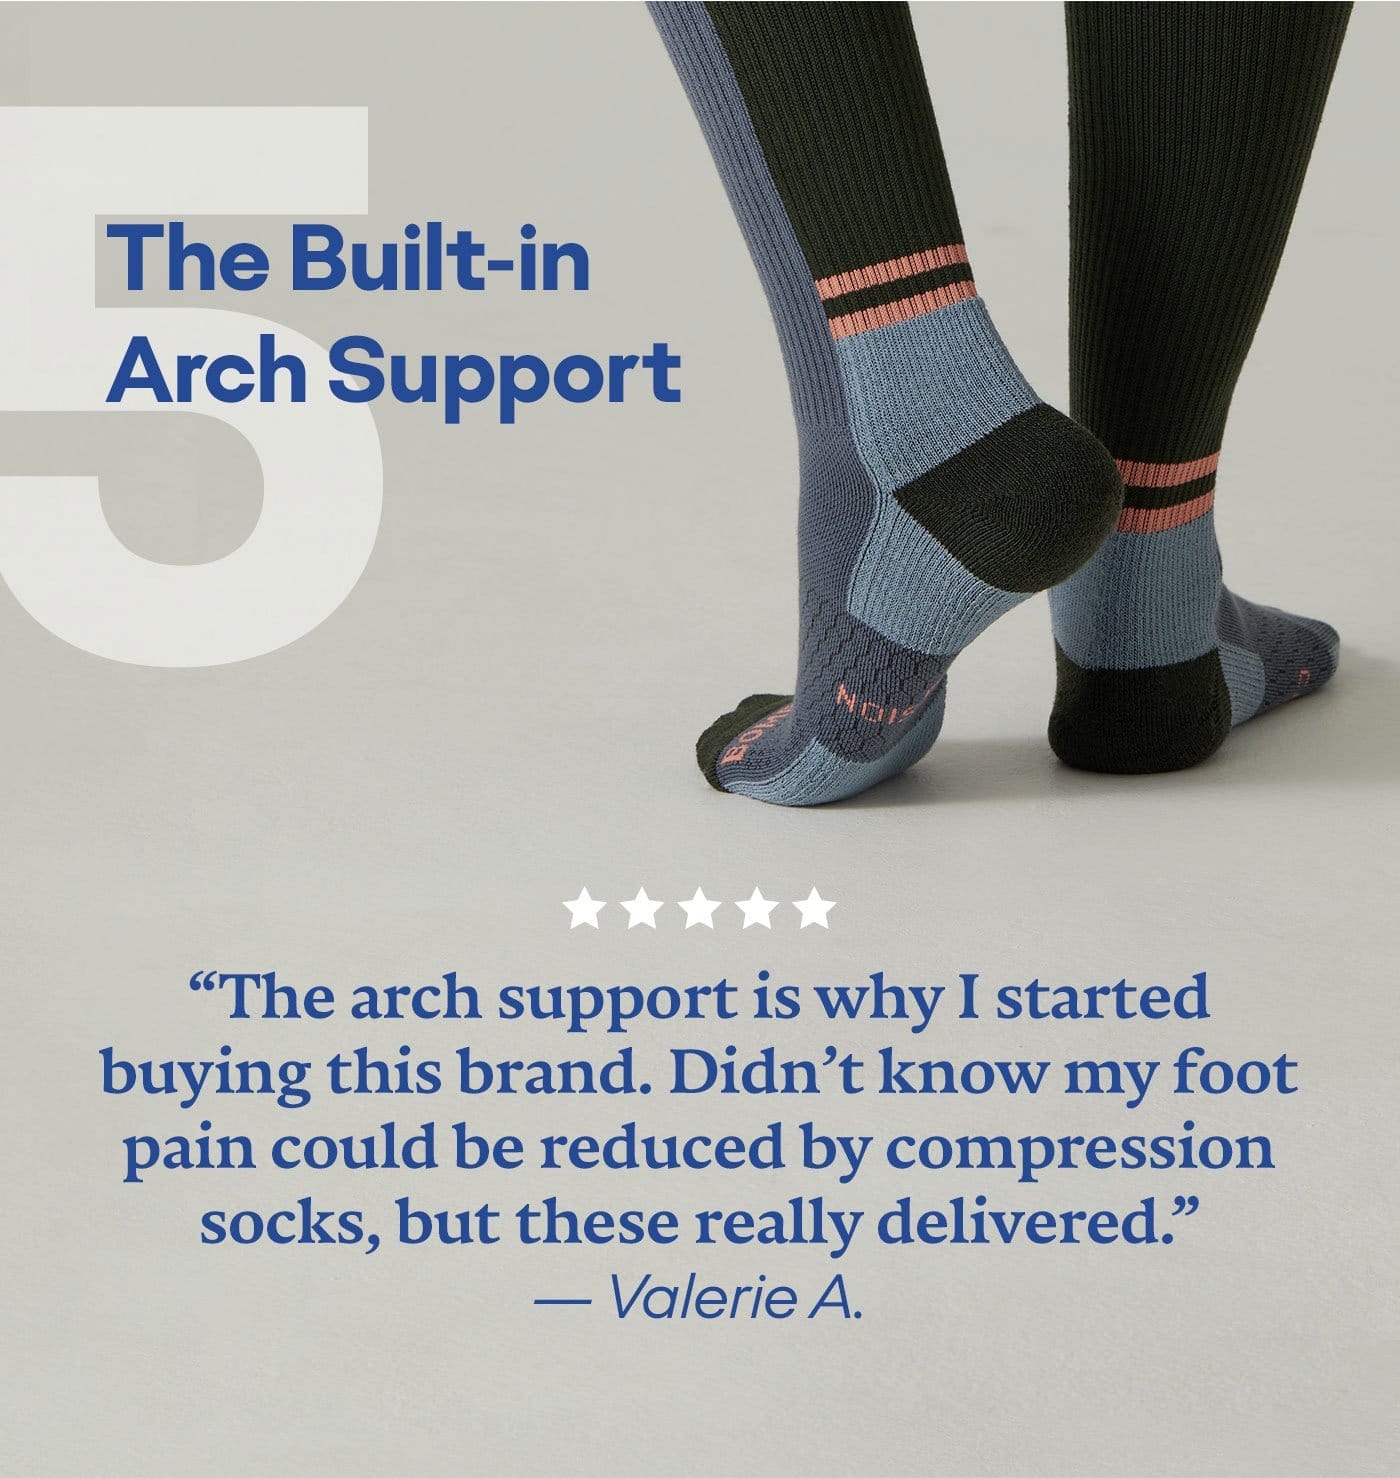 The Built-in Arch Support